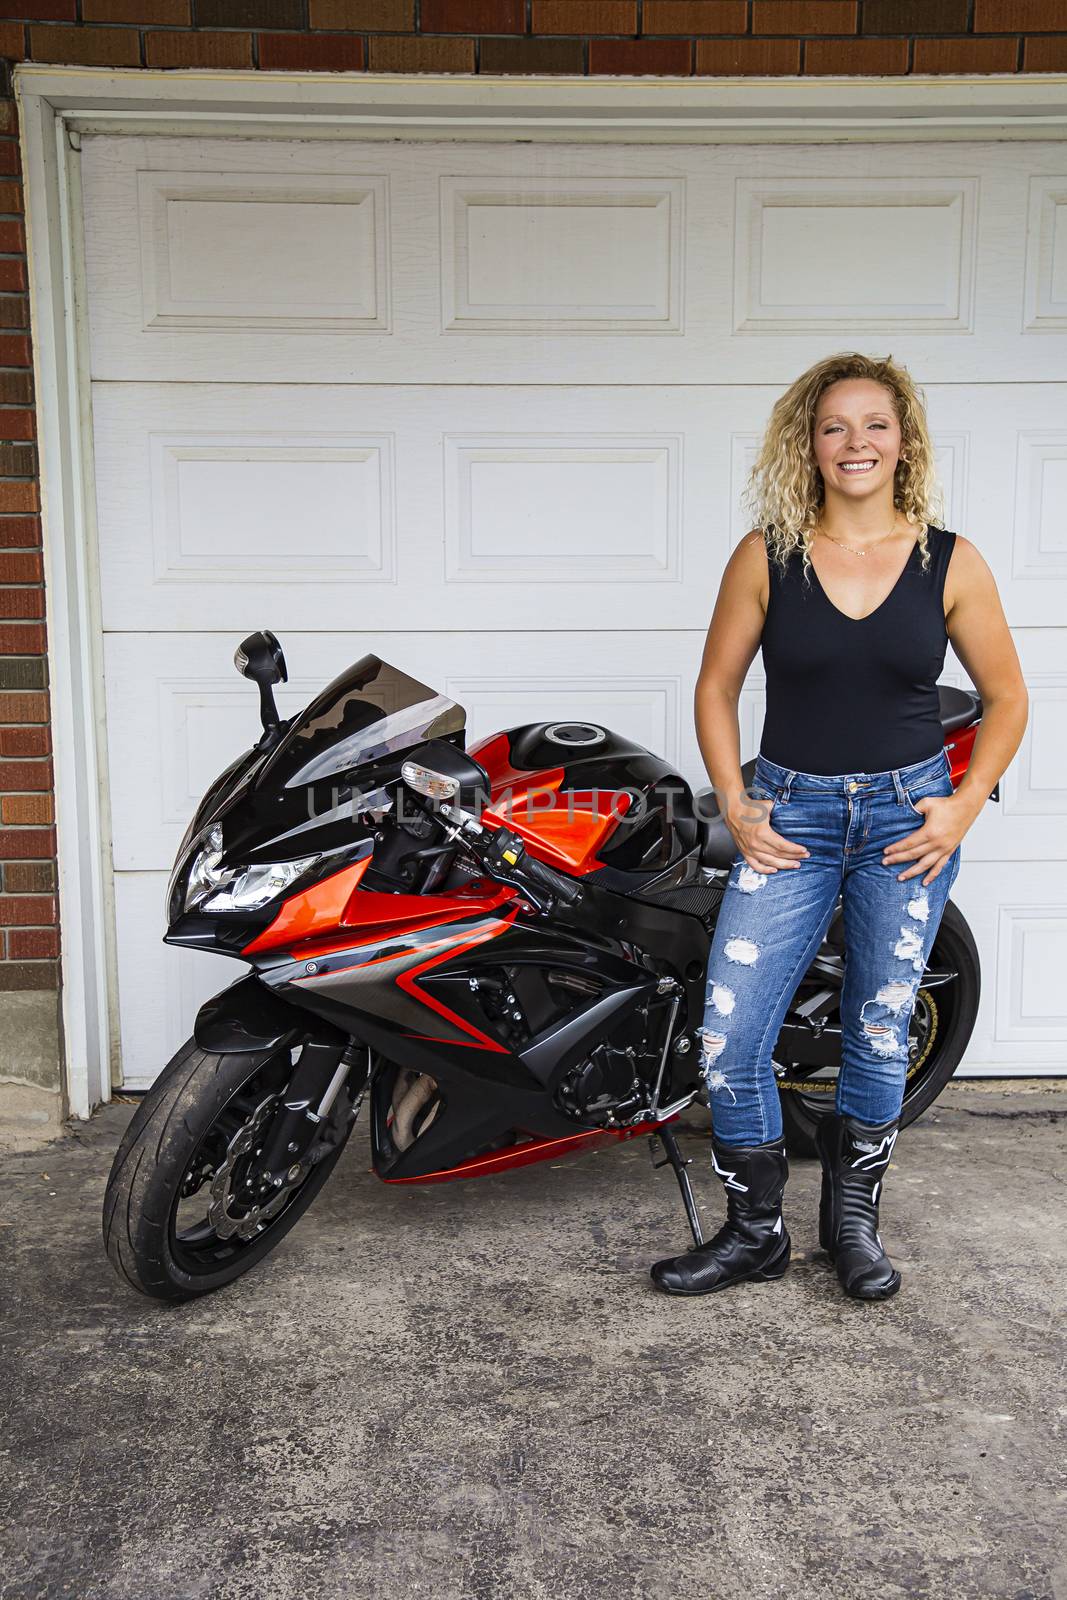 Twenty something blond woman wearing stylish ripped jeans and a black tank top, standing in from of a sport motocycle, with a happy expression